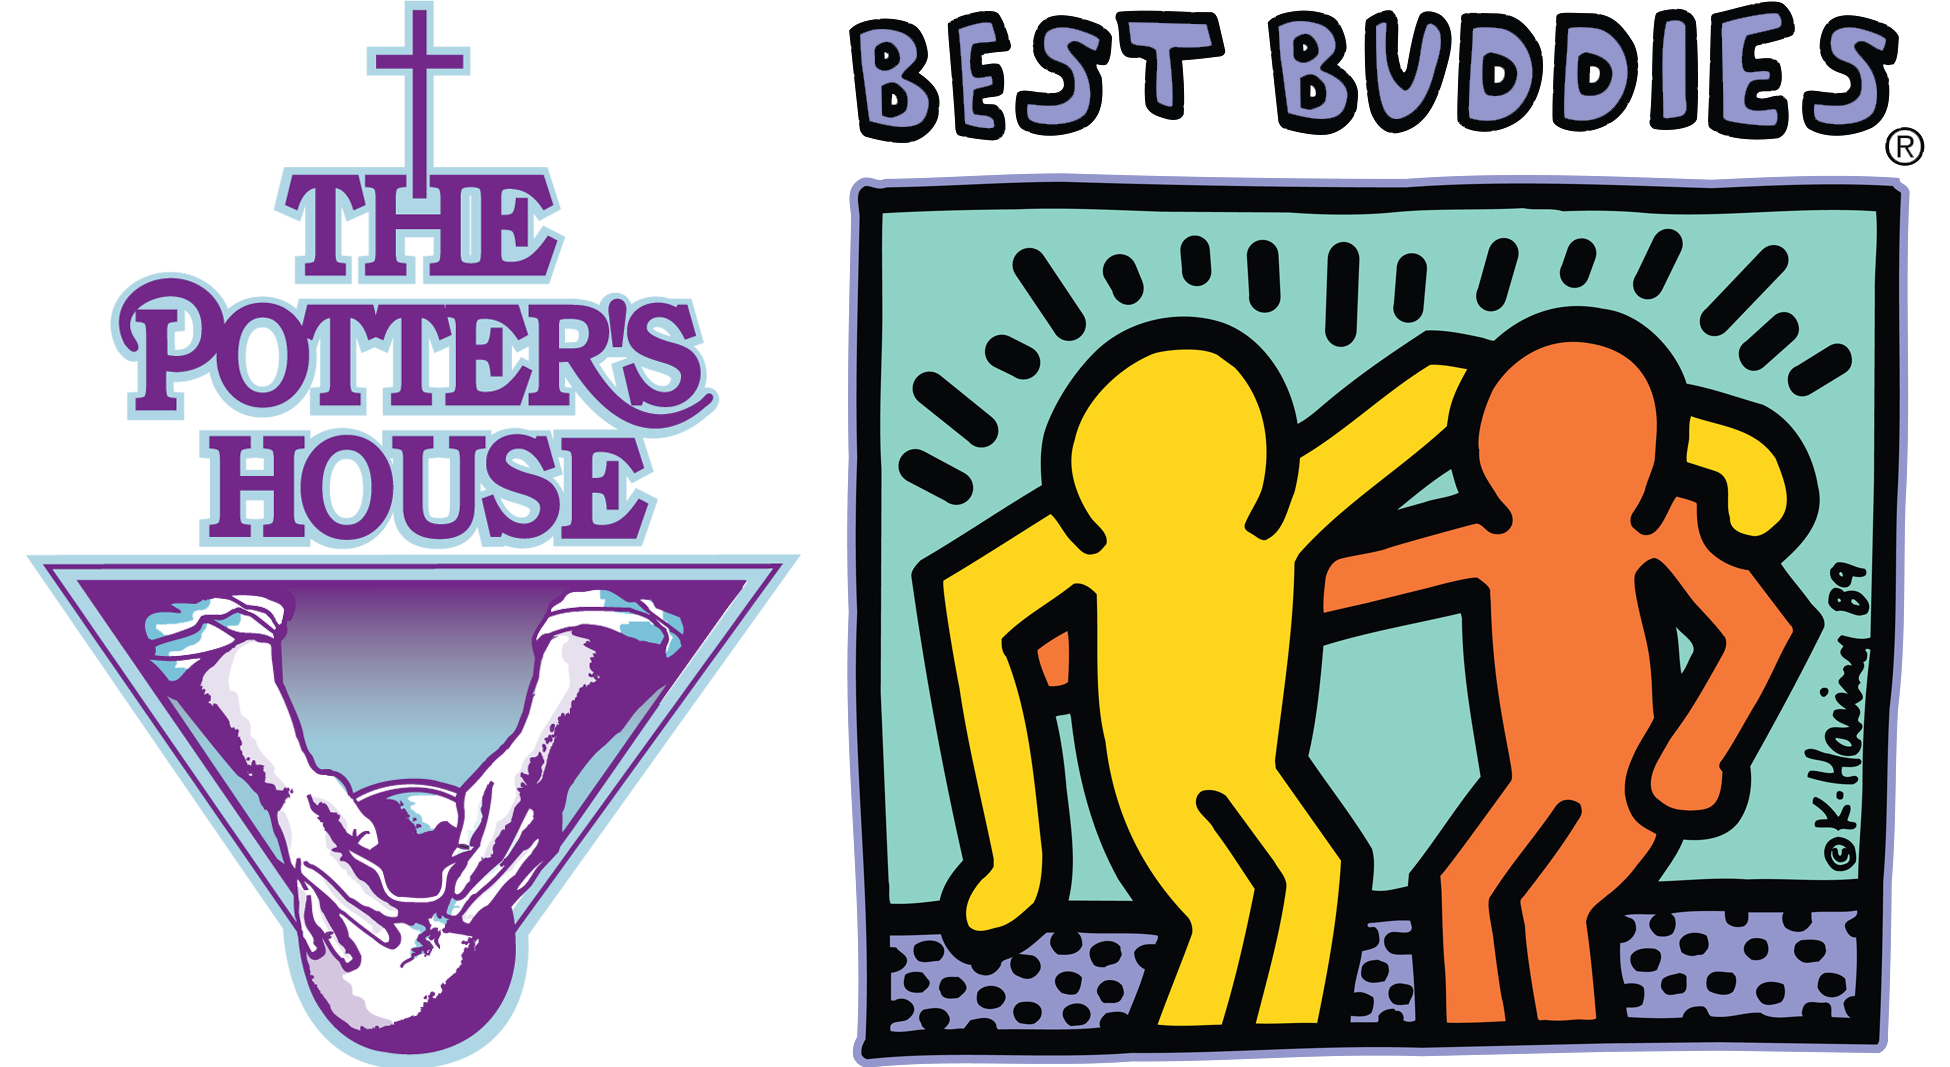 About Best Buddies - The Potter's House Dallas Chapter